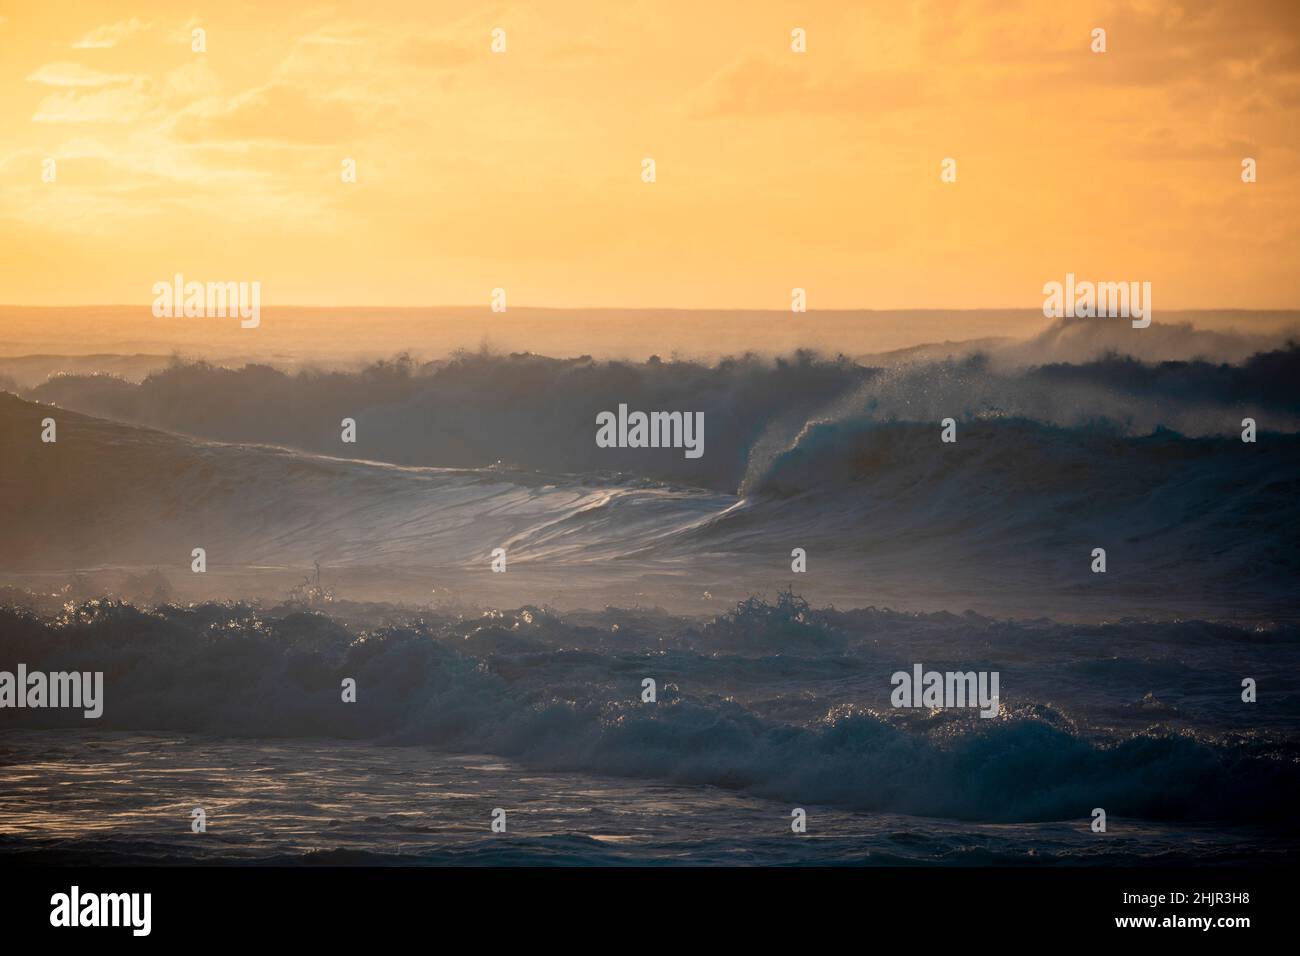 Misty Sunset over Waves on North Shore of Oahu Stock Photo